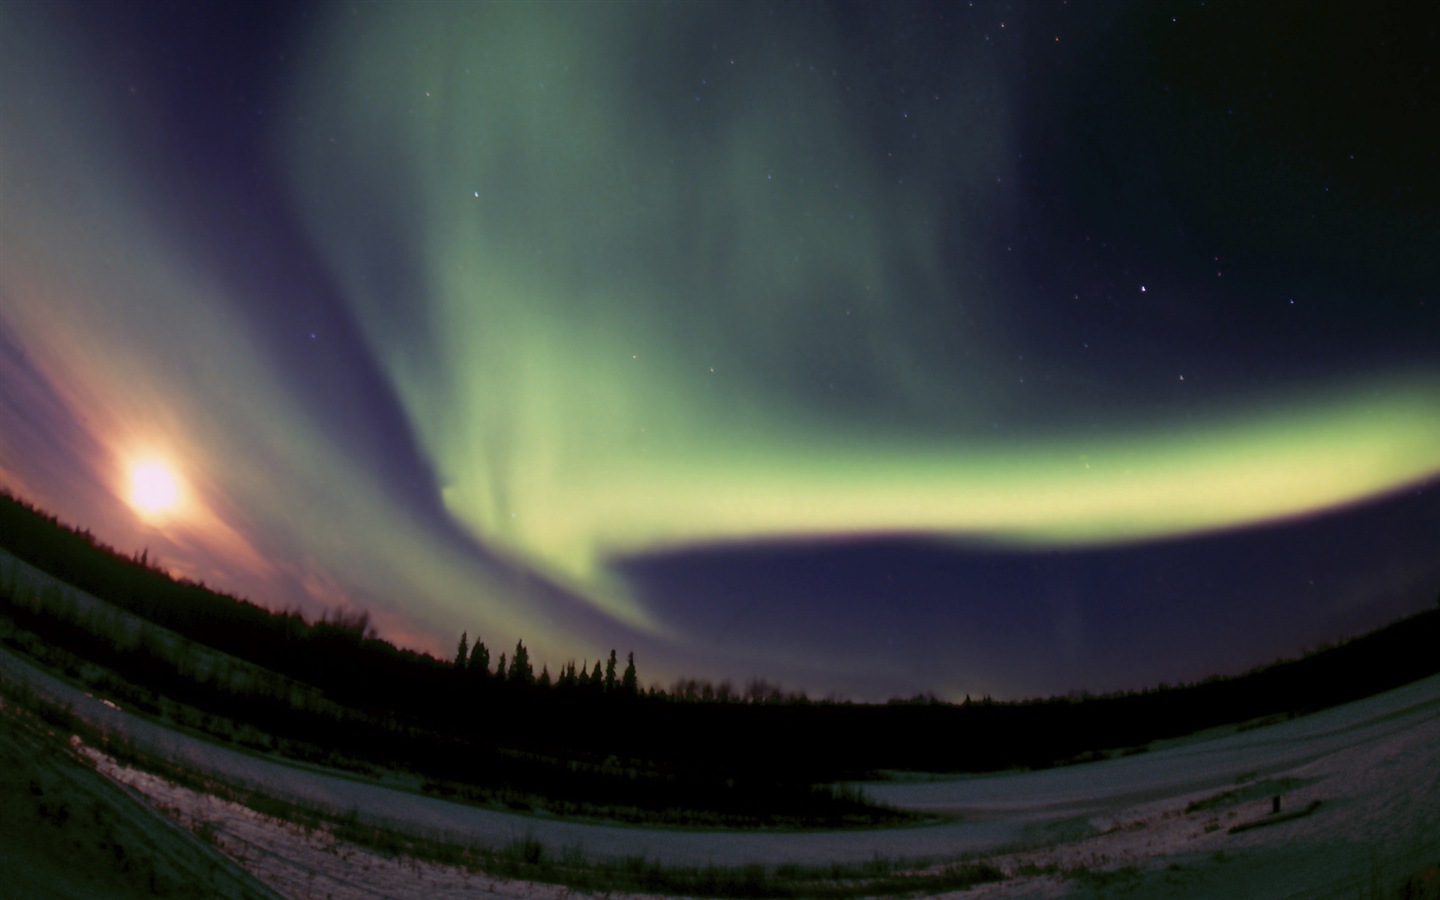 Natural wonders of the Northern Lights HD Wallpaper (2) #11 - 1440x900